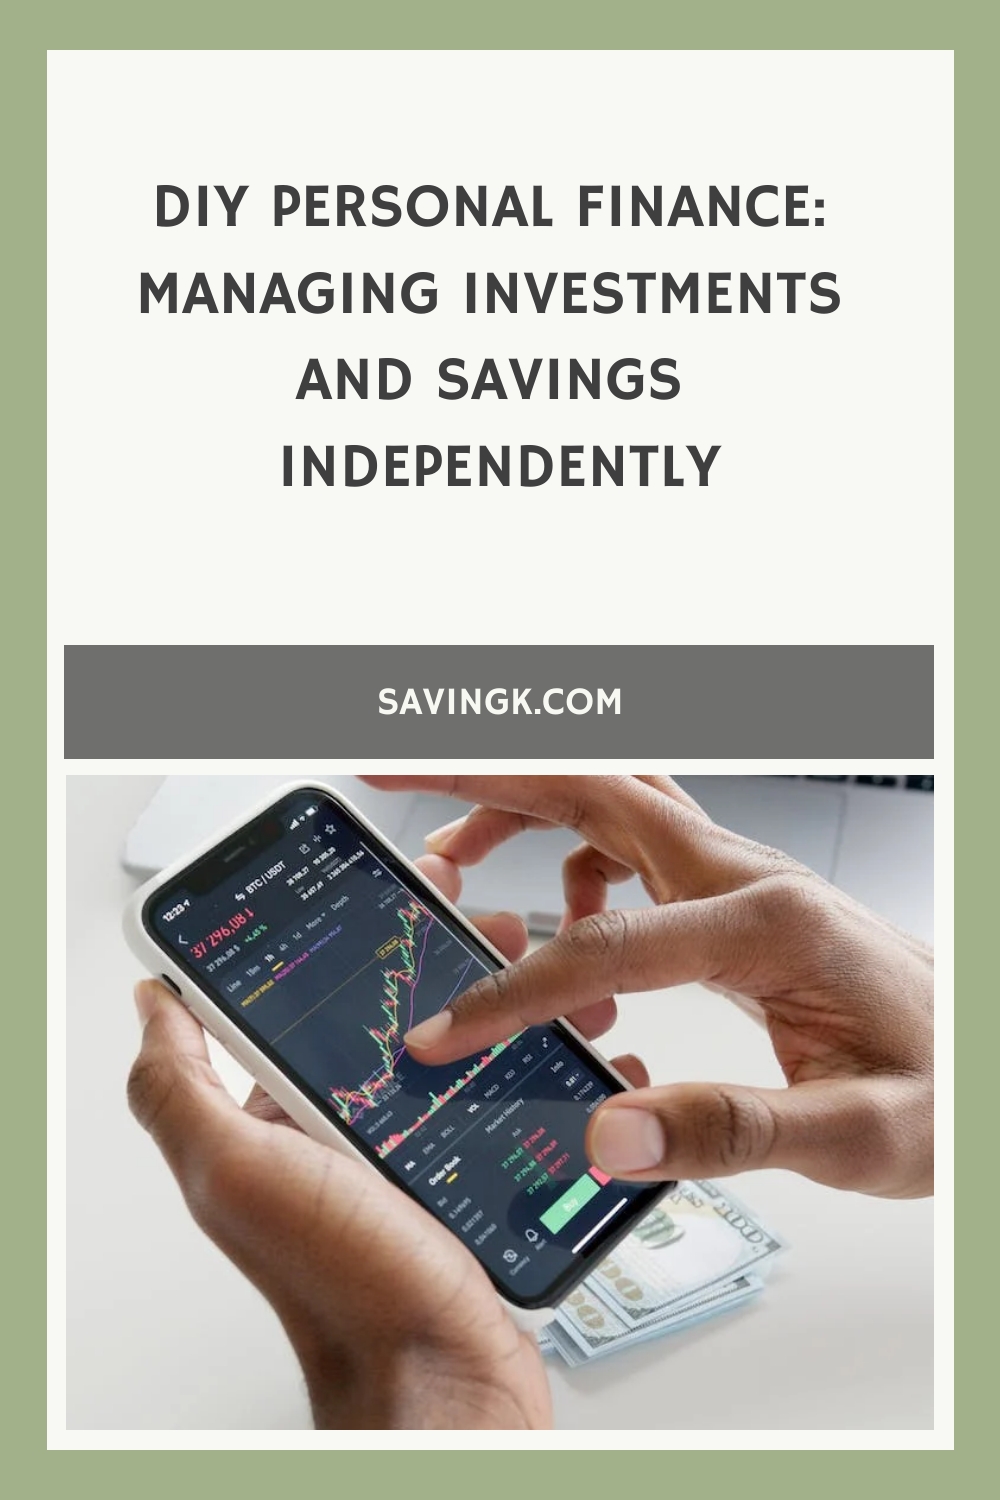 DIY Personal Finance: Managing Investments and Savings Independently